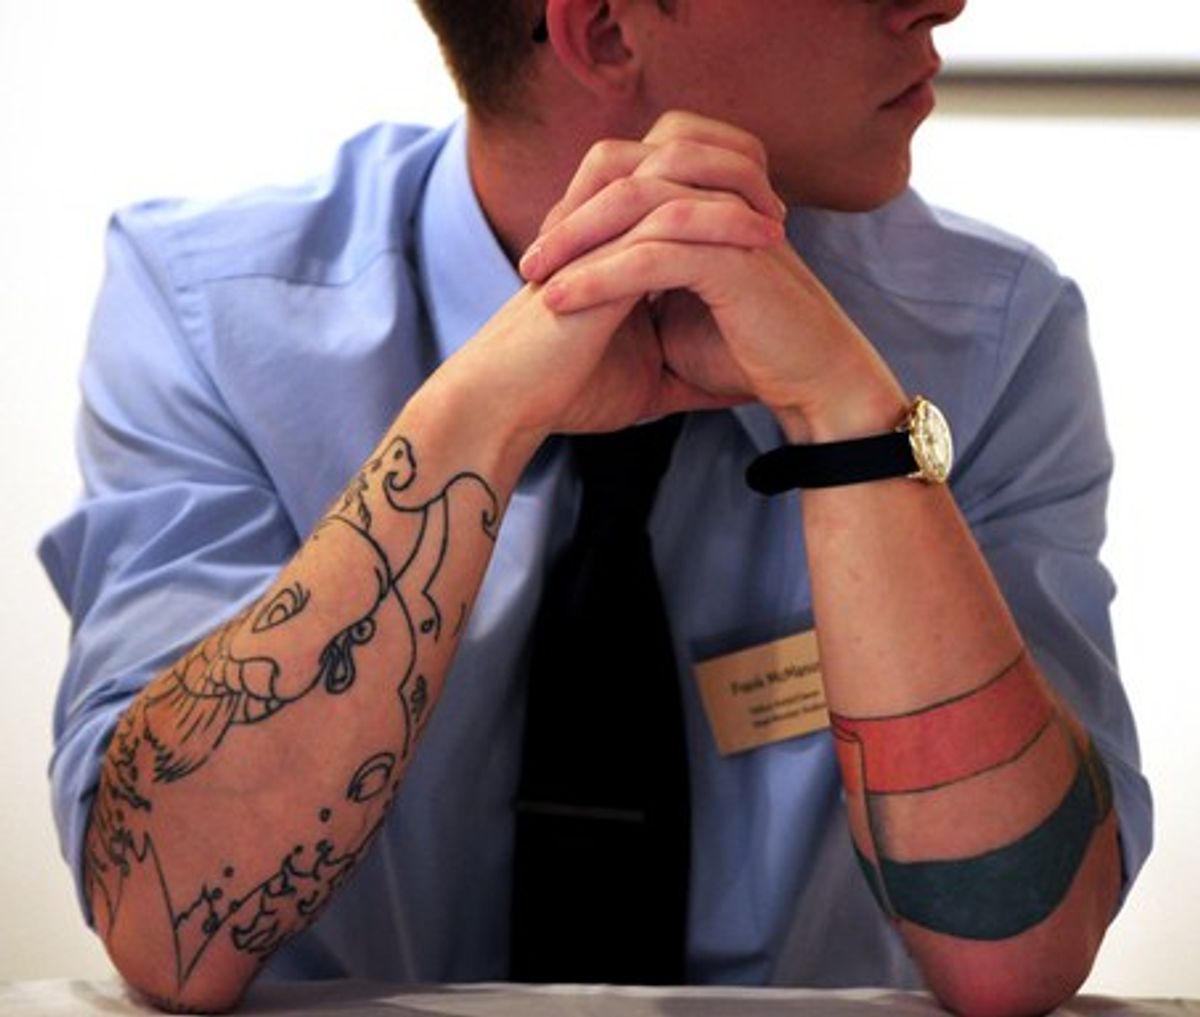 Why Tattoos Should Be Allowed In The Workplace